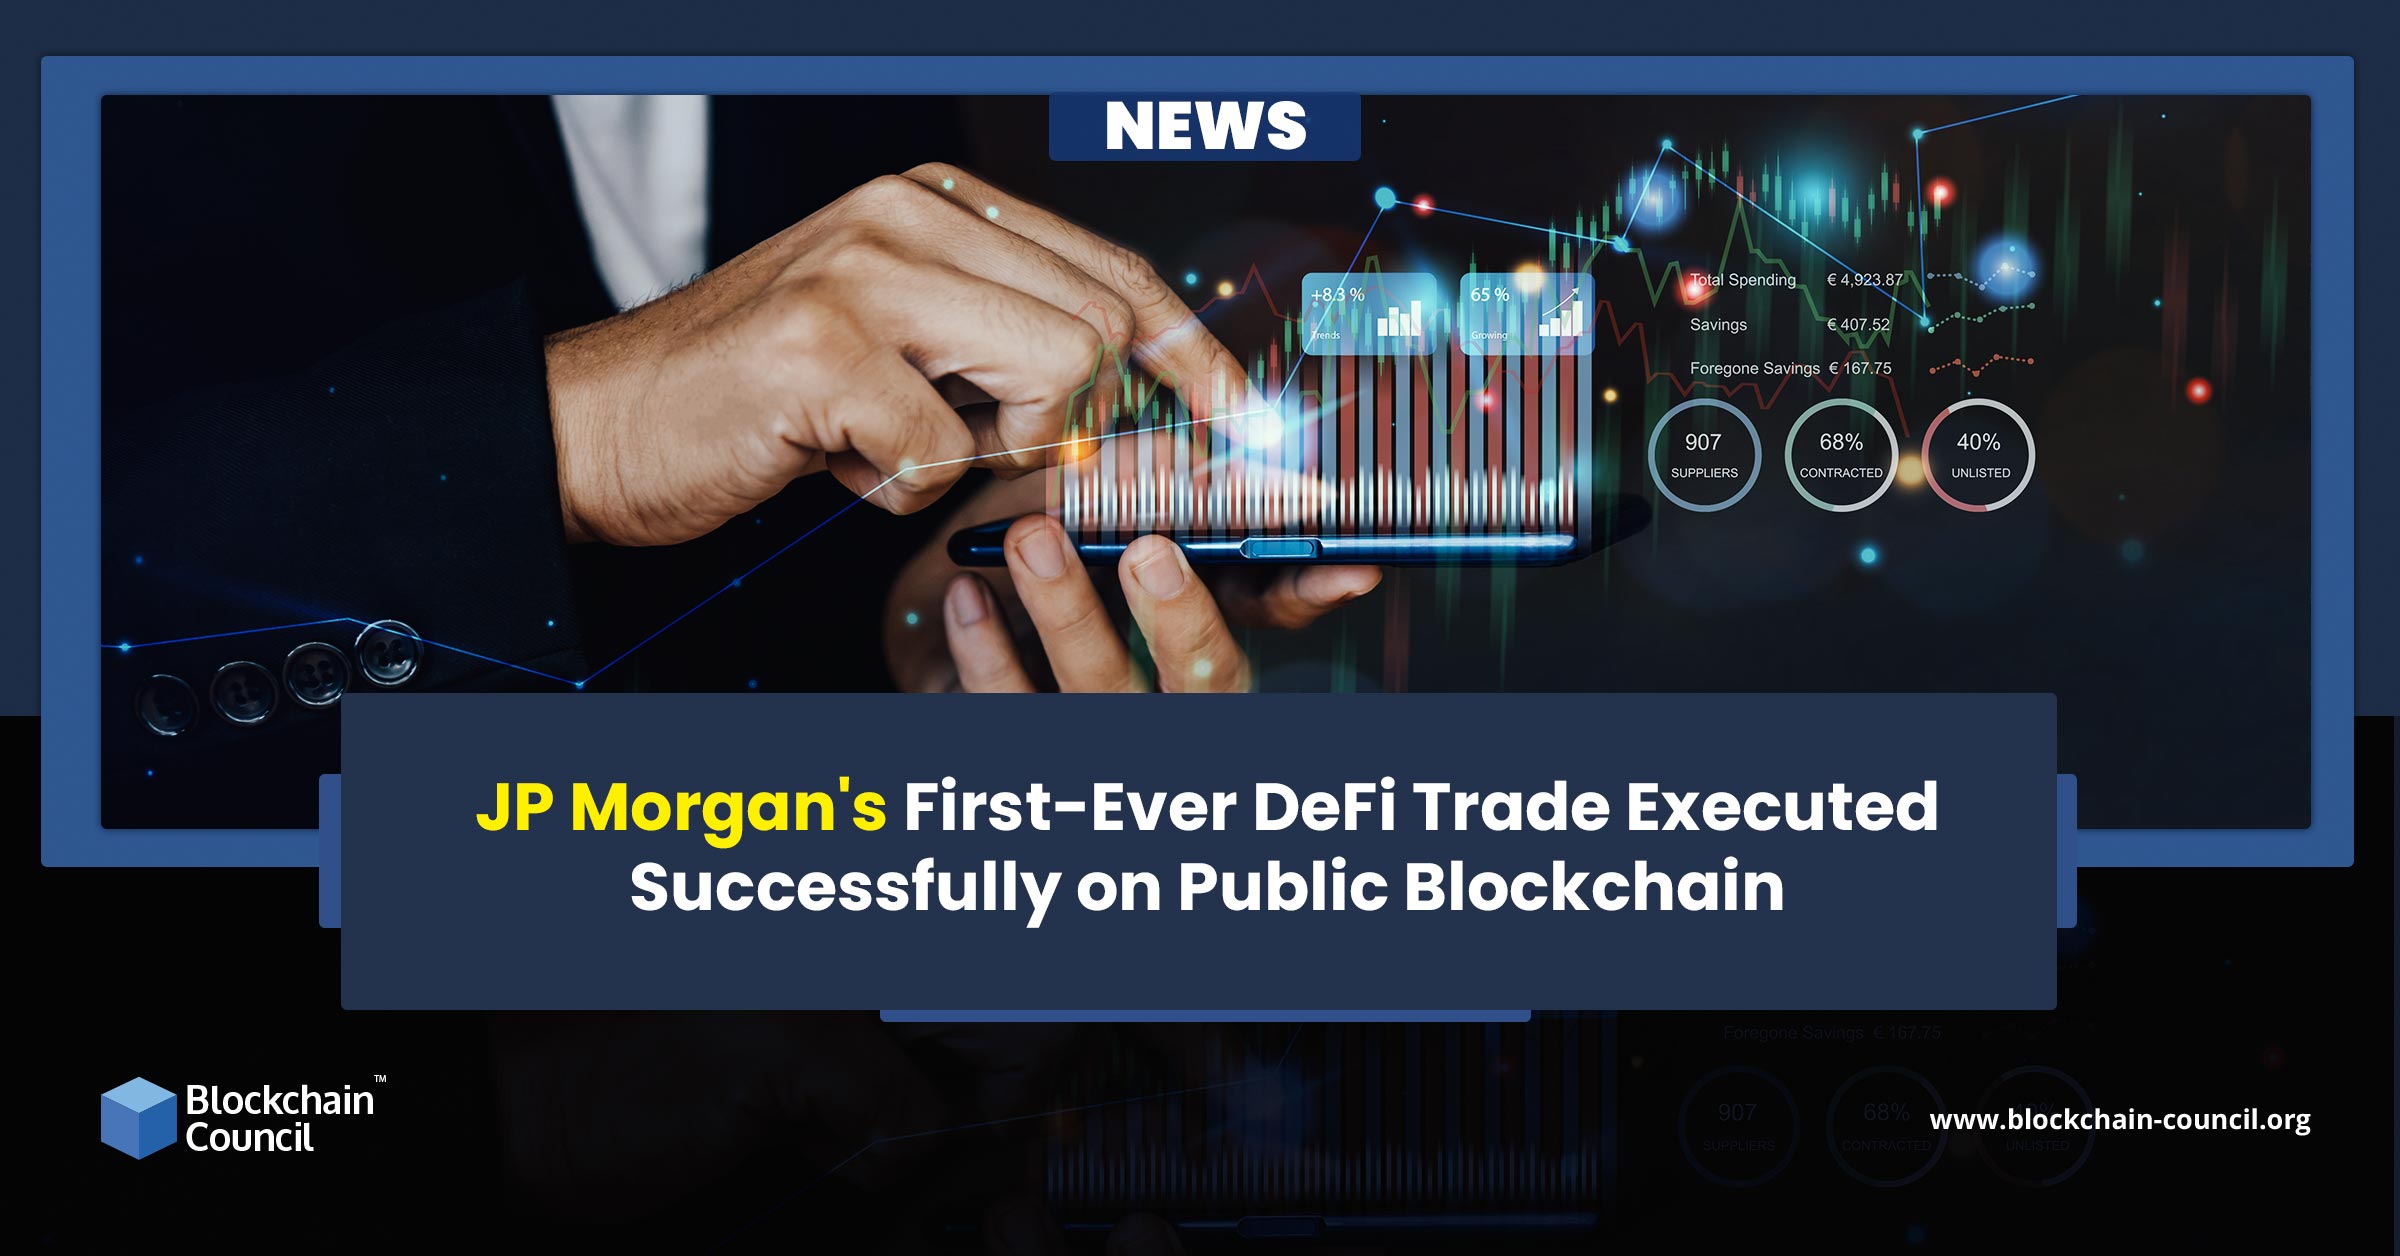 JP Morgan's First-Ever DeFi Trade Executed Successfully on Public Blockchain